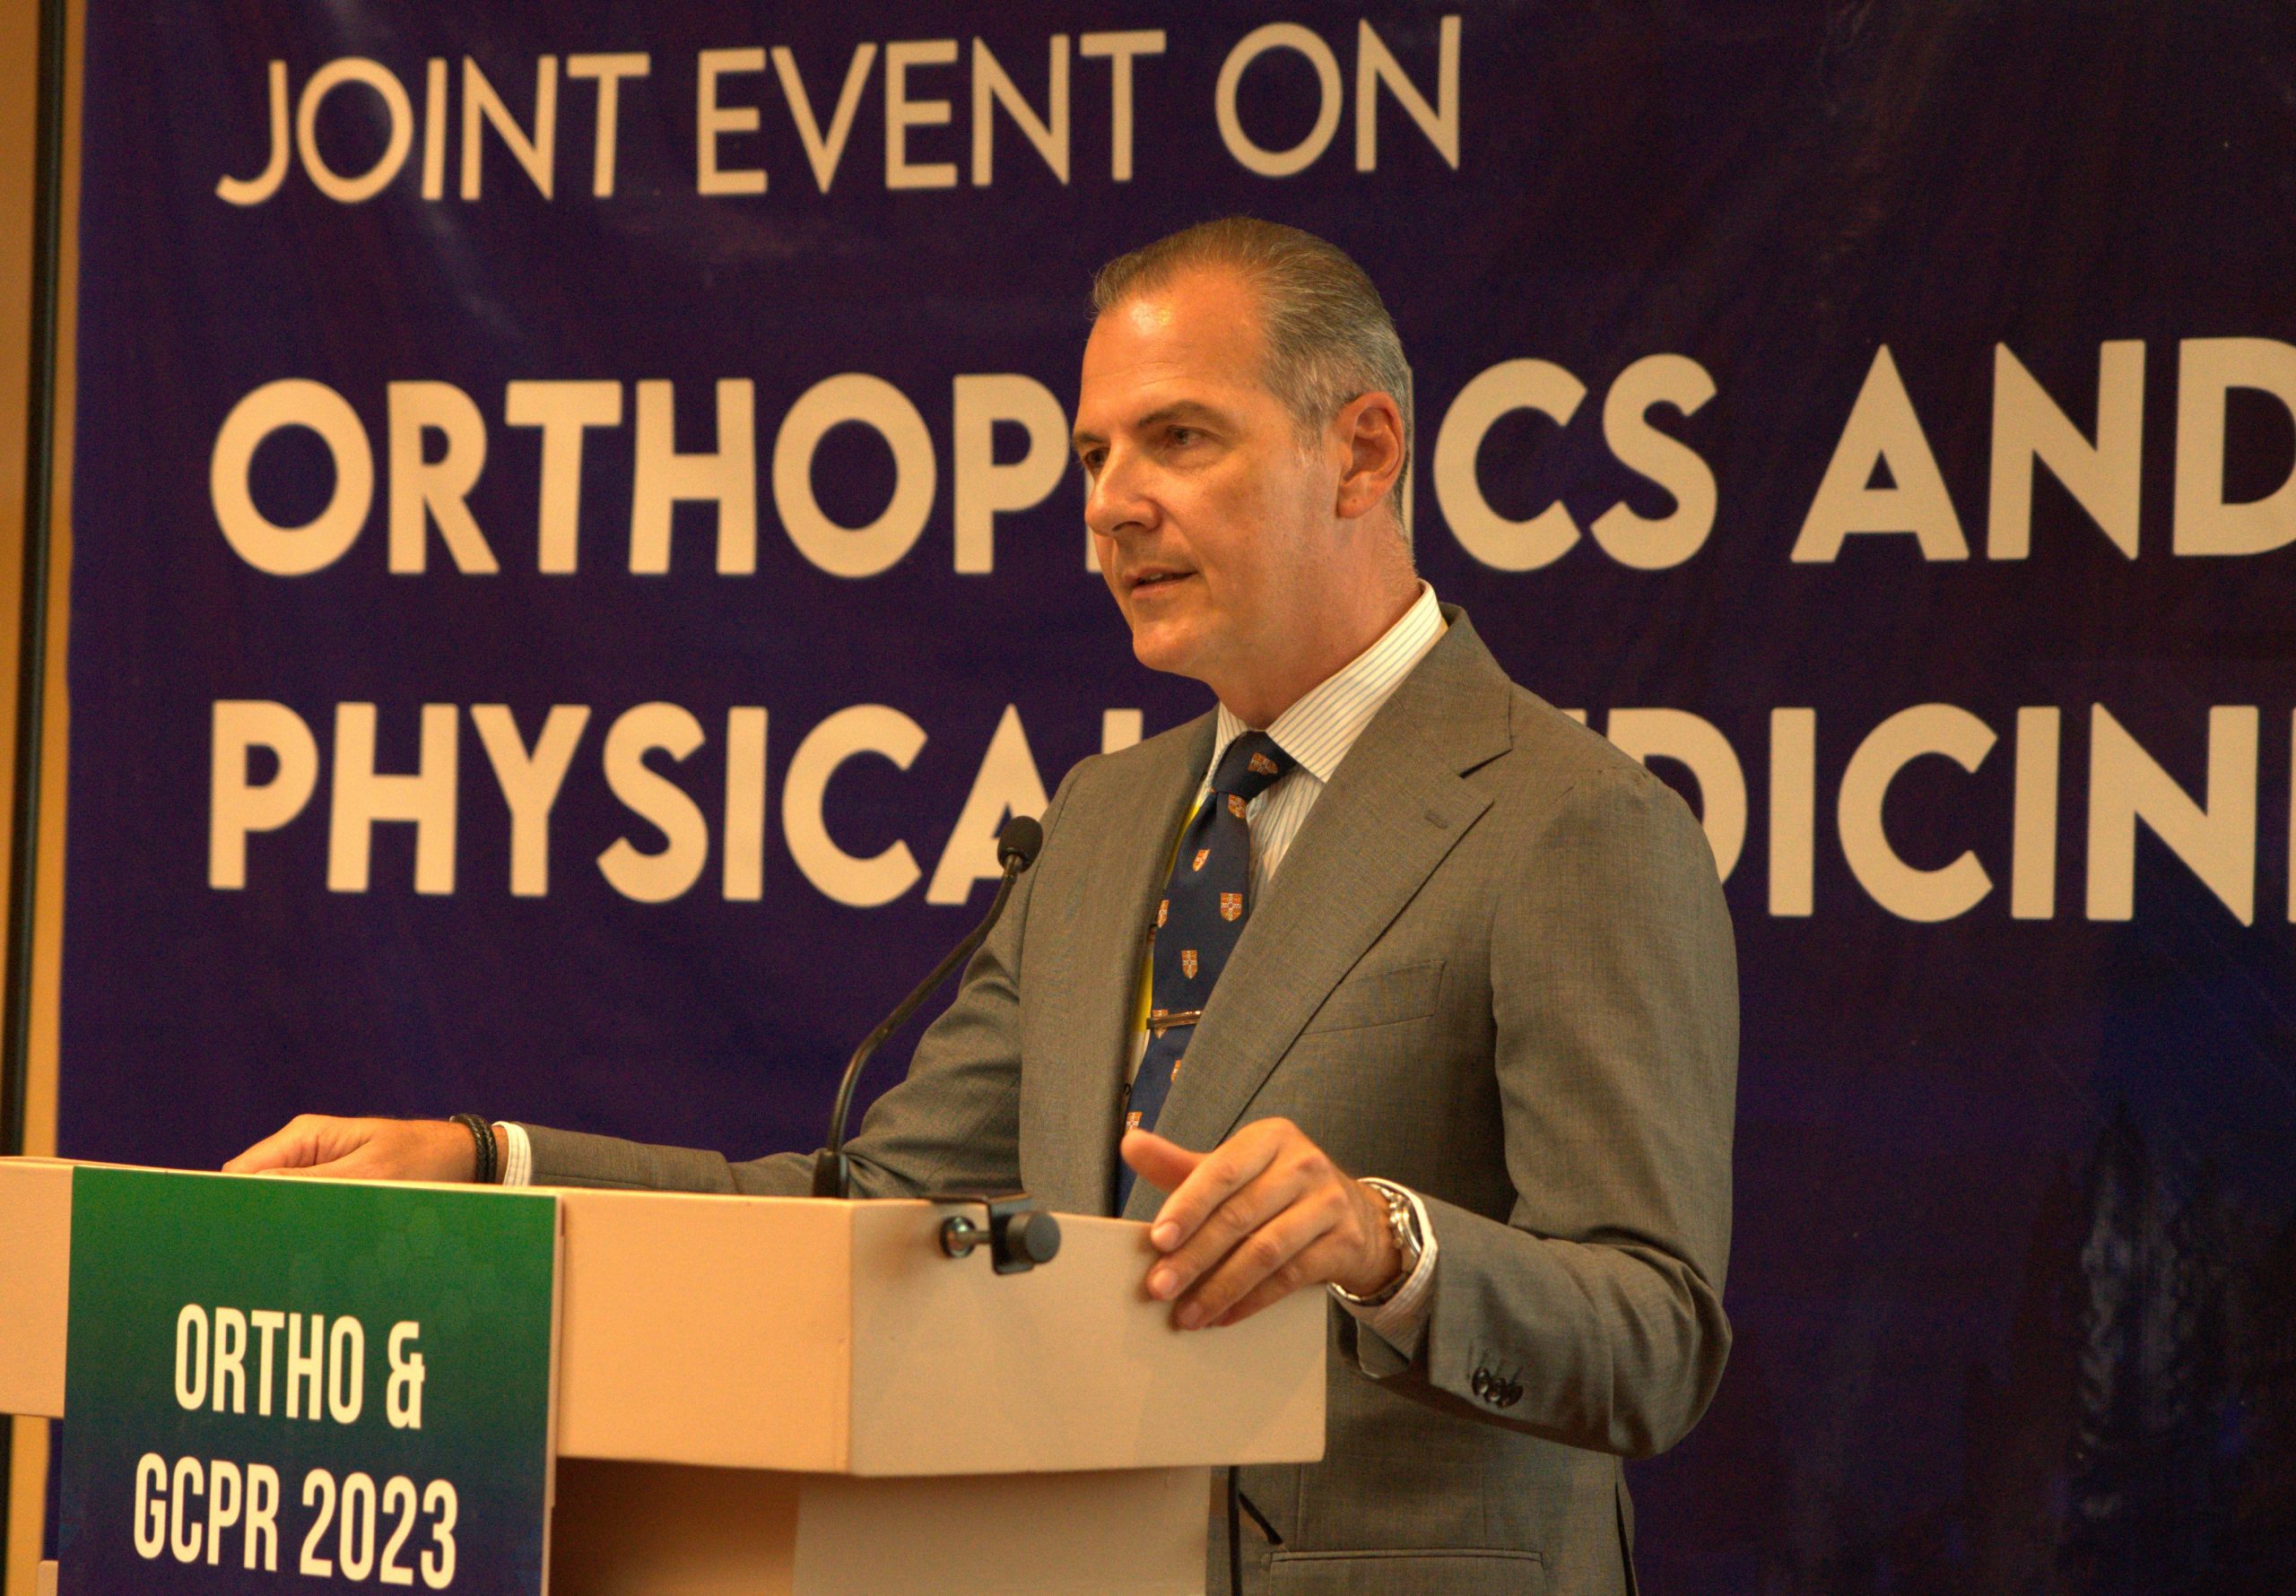 Watch online Dr Giotikas’ lecture at the World Orthopaedic Conference 2023 in London